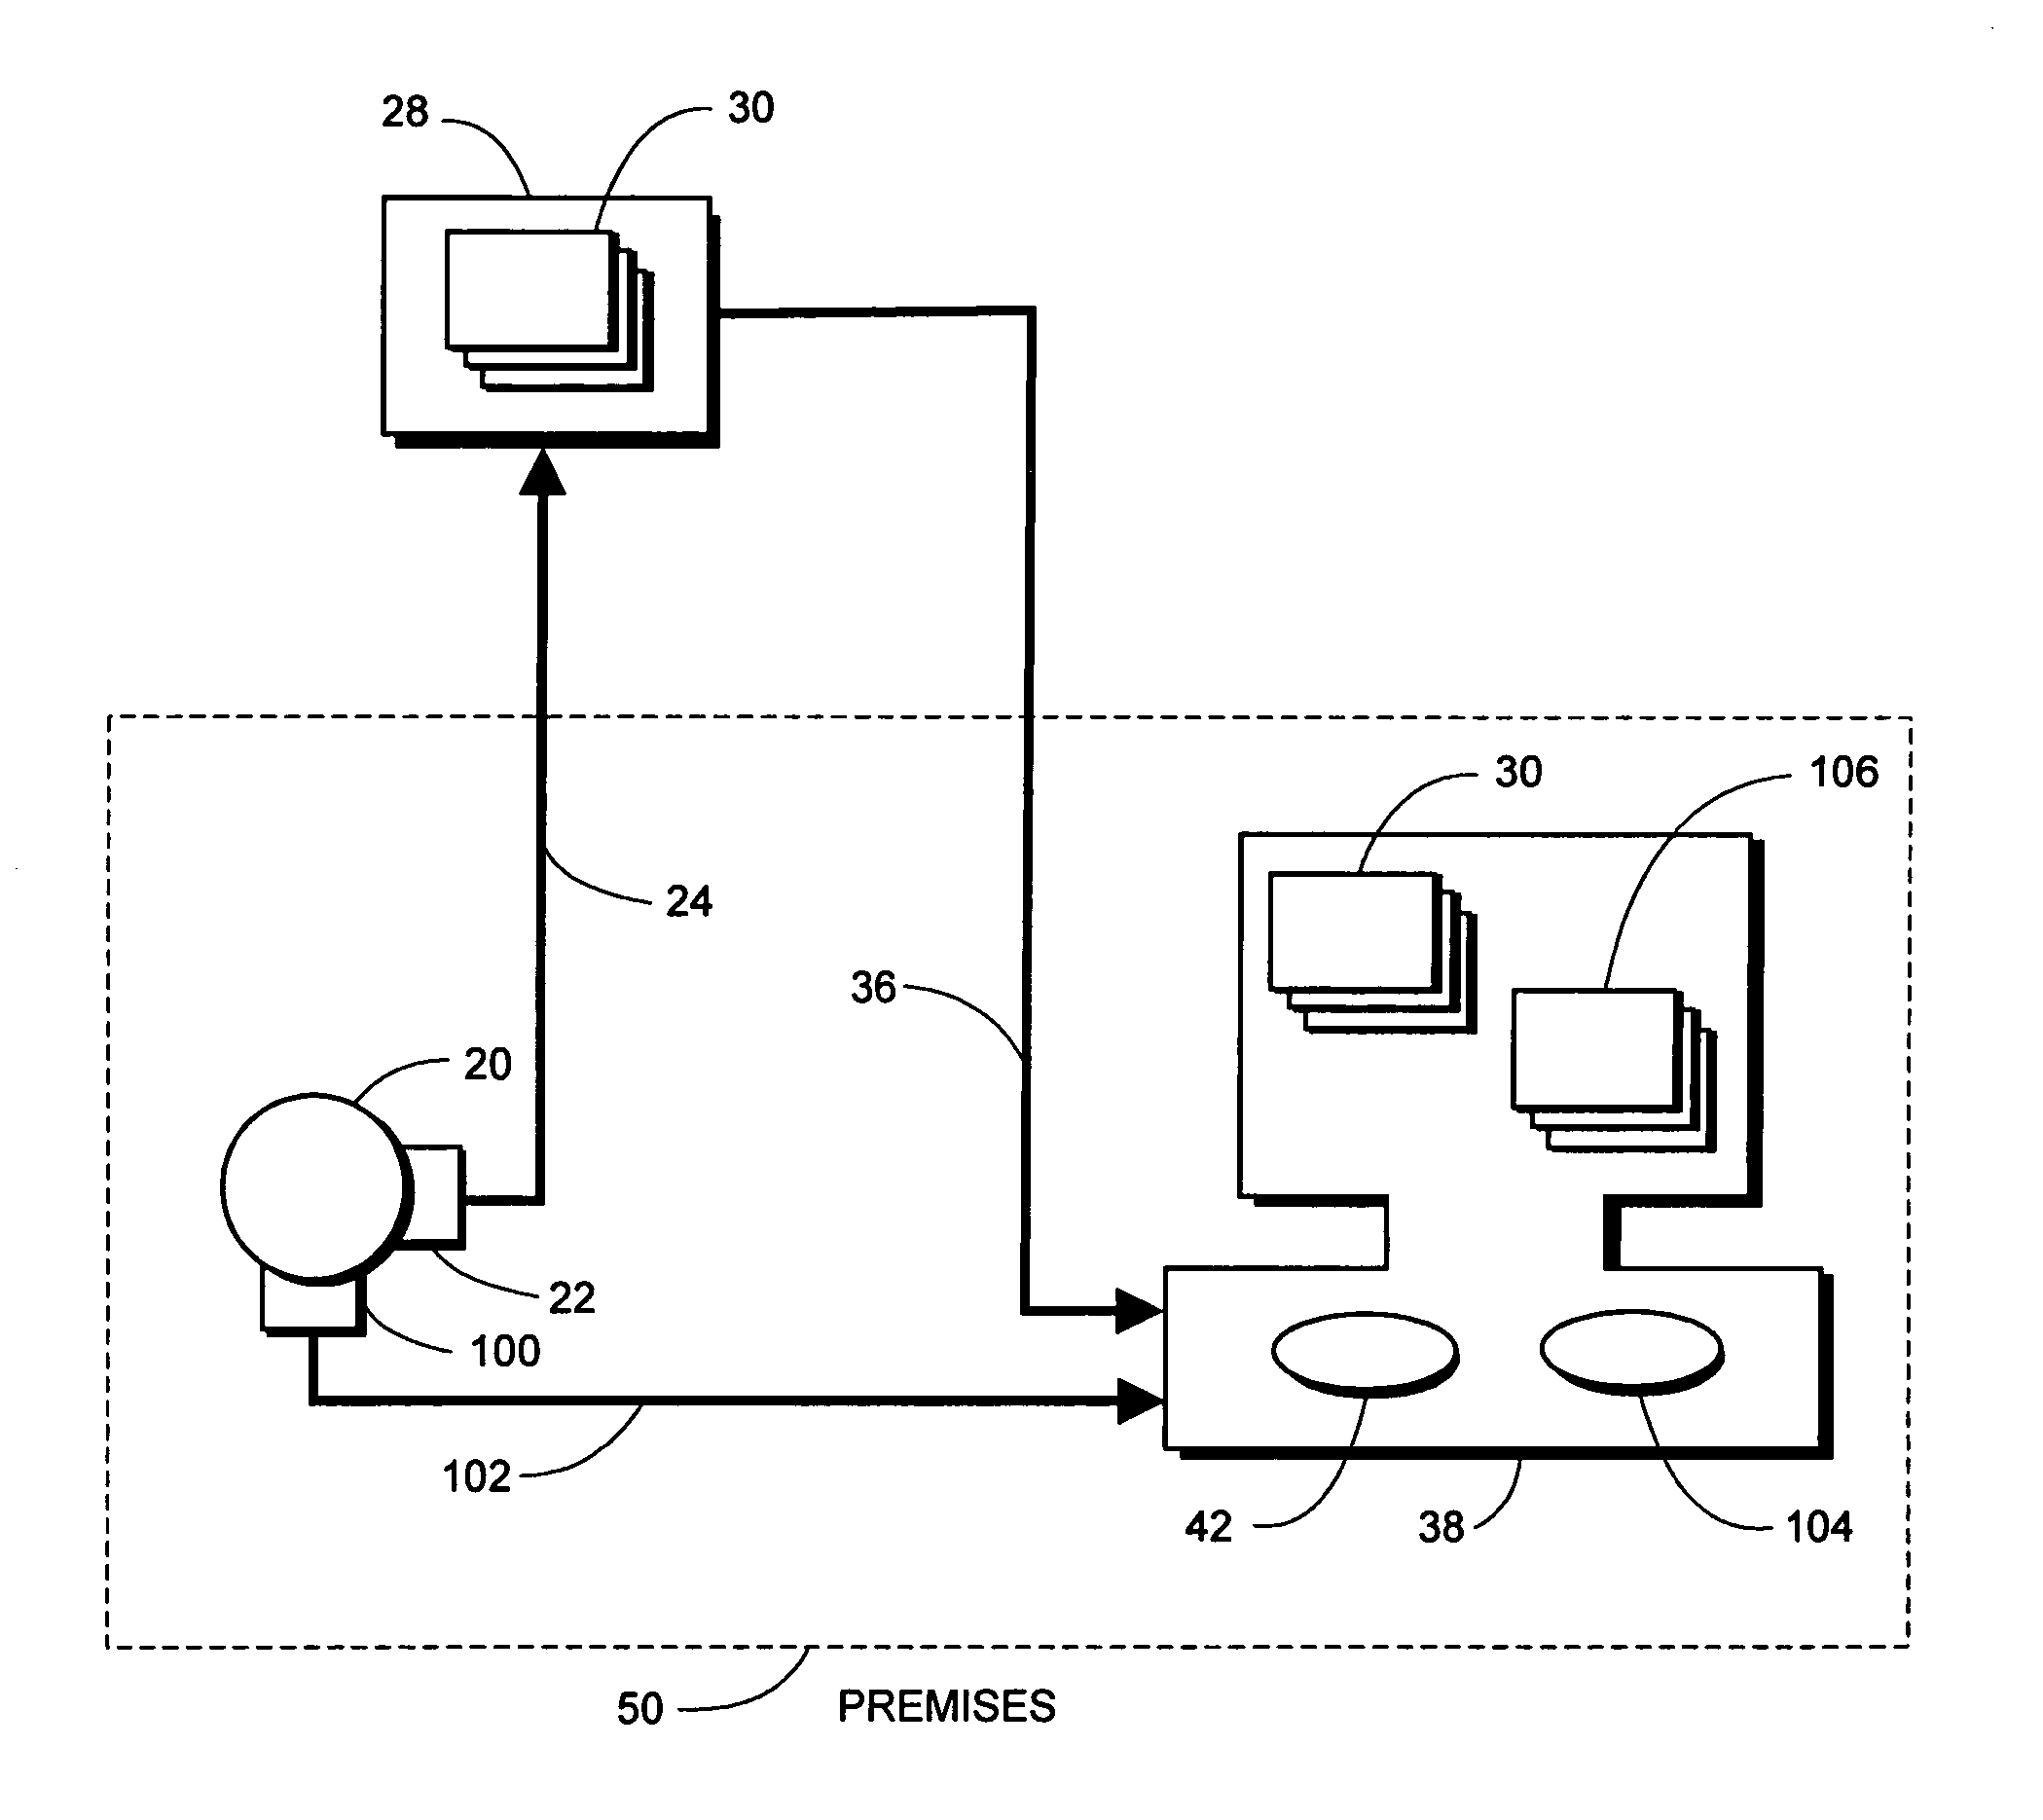 Method for providing comprehensive electrical usage and demand data